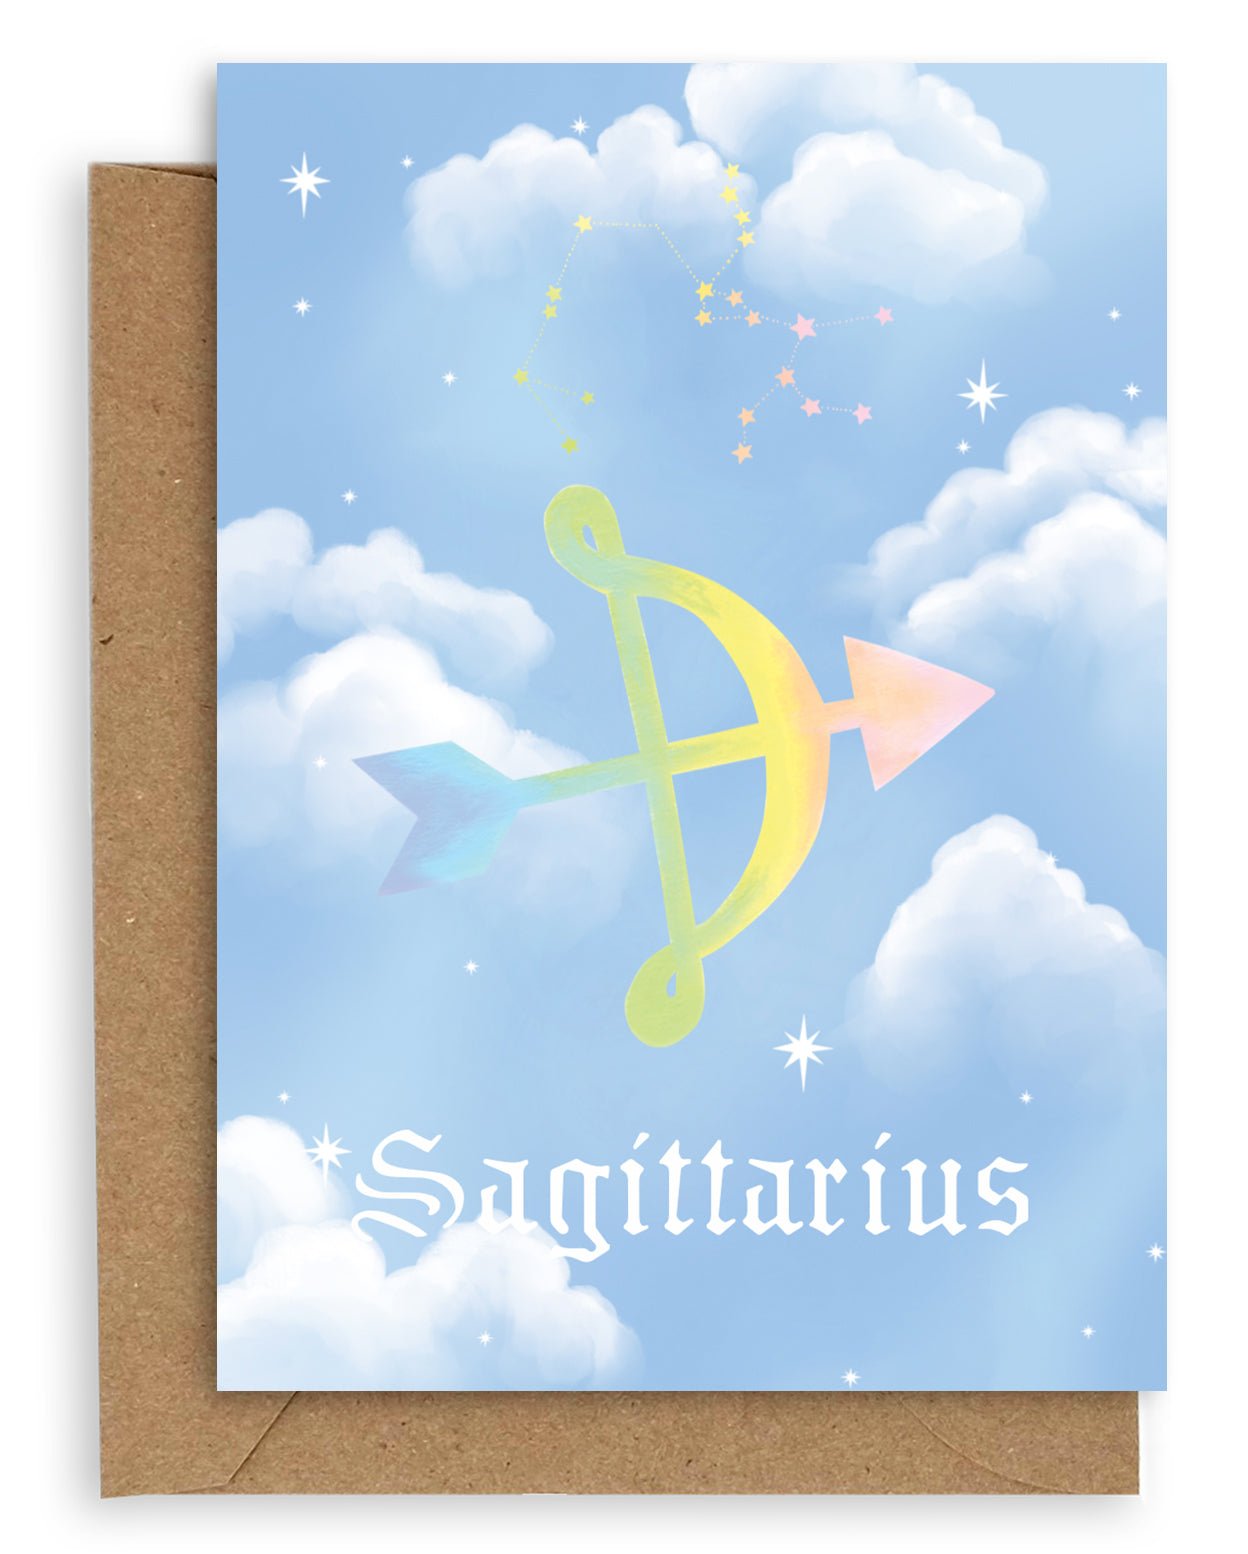 Sagittarius  Horoscope card with a kraft envelope. The horoscope symbol is painted in rainbow pastel on a blue background with white clouds. 